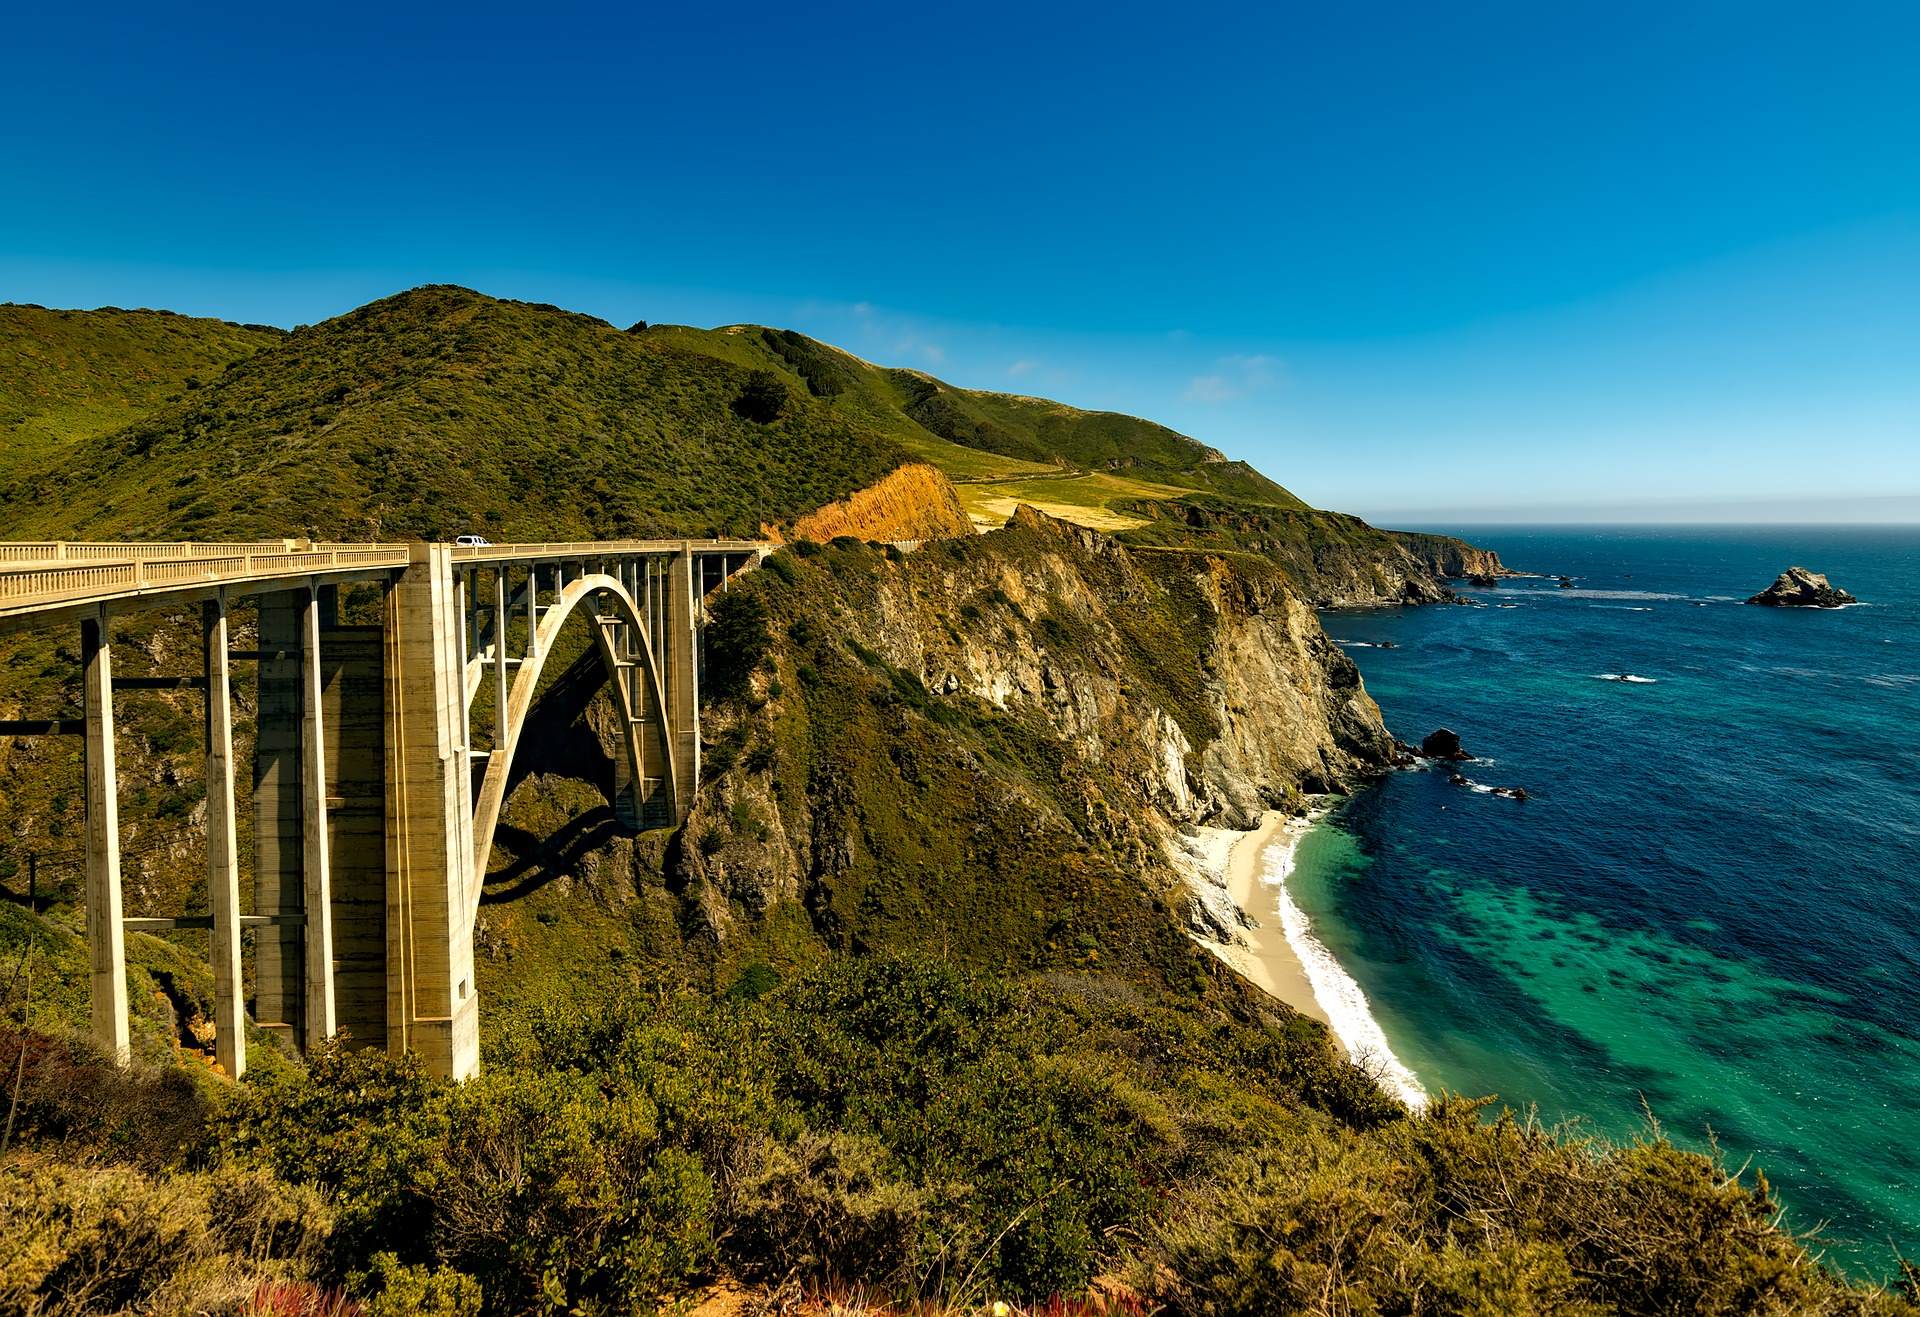 20 Best Things to Do on Pacific Coast Highway from San Francisco to Los Angeles - Endless Travel Destinations